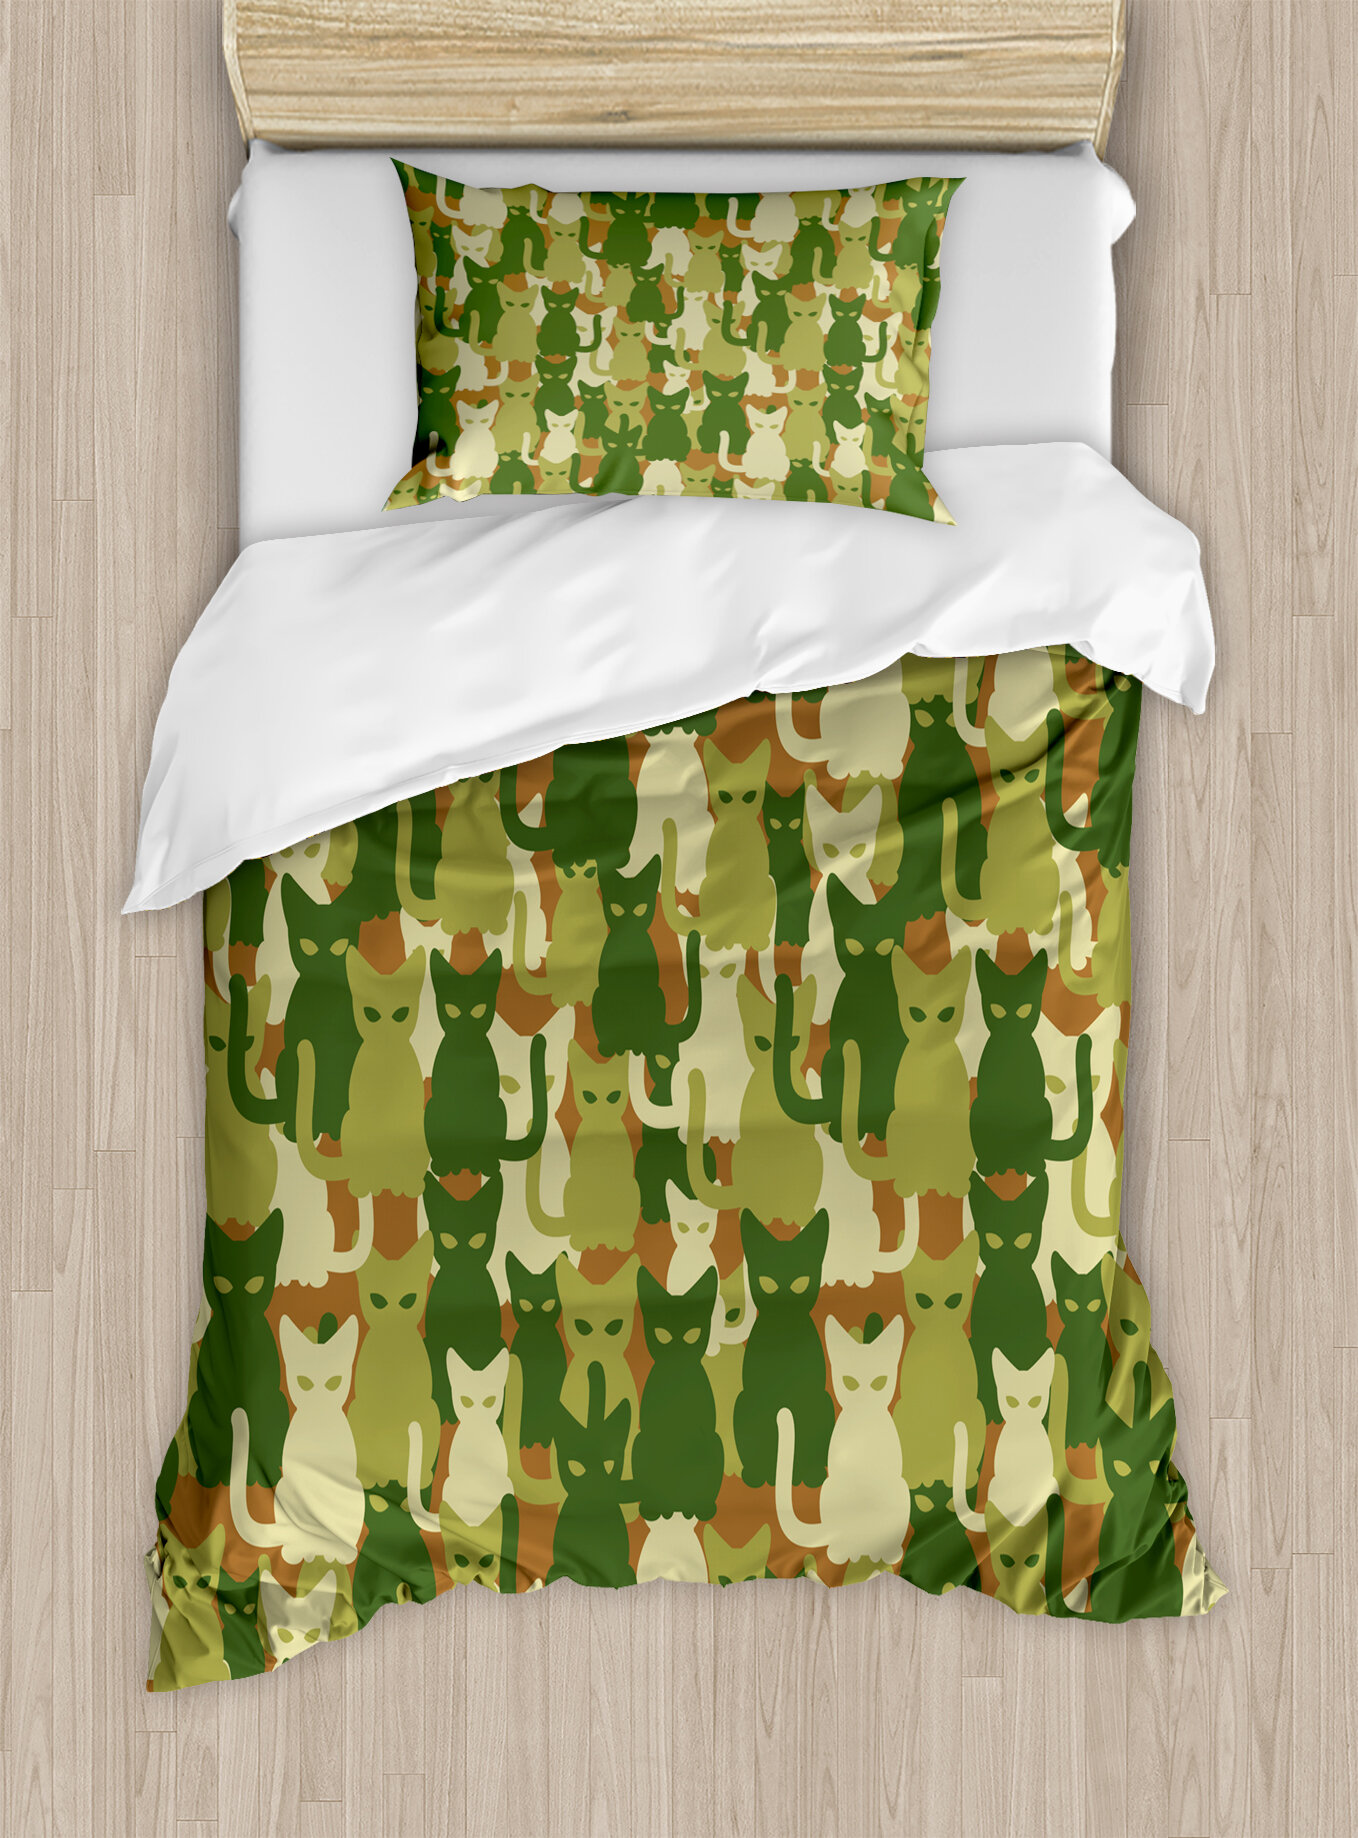 East Urban Home Camo Soldier Kittens Protective Cat Army Theme